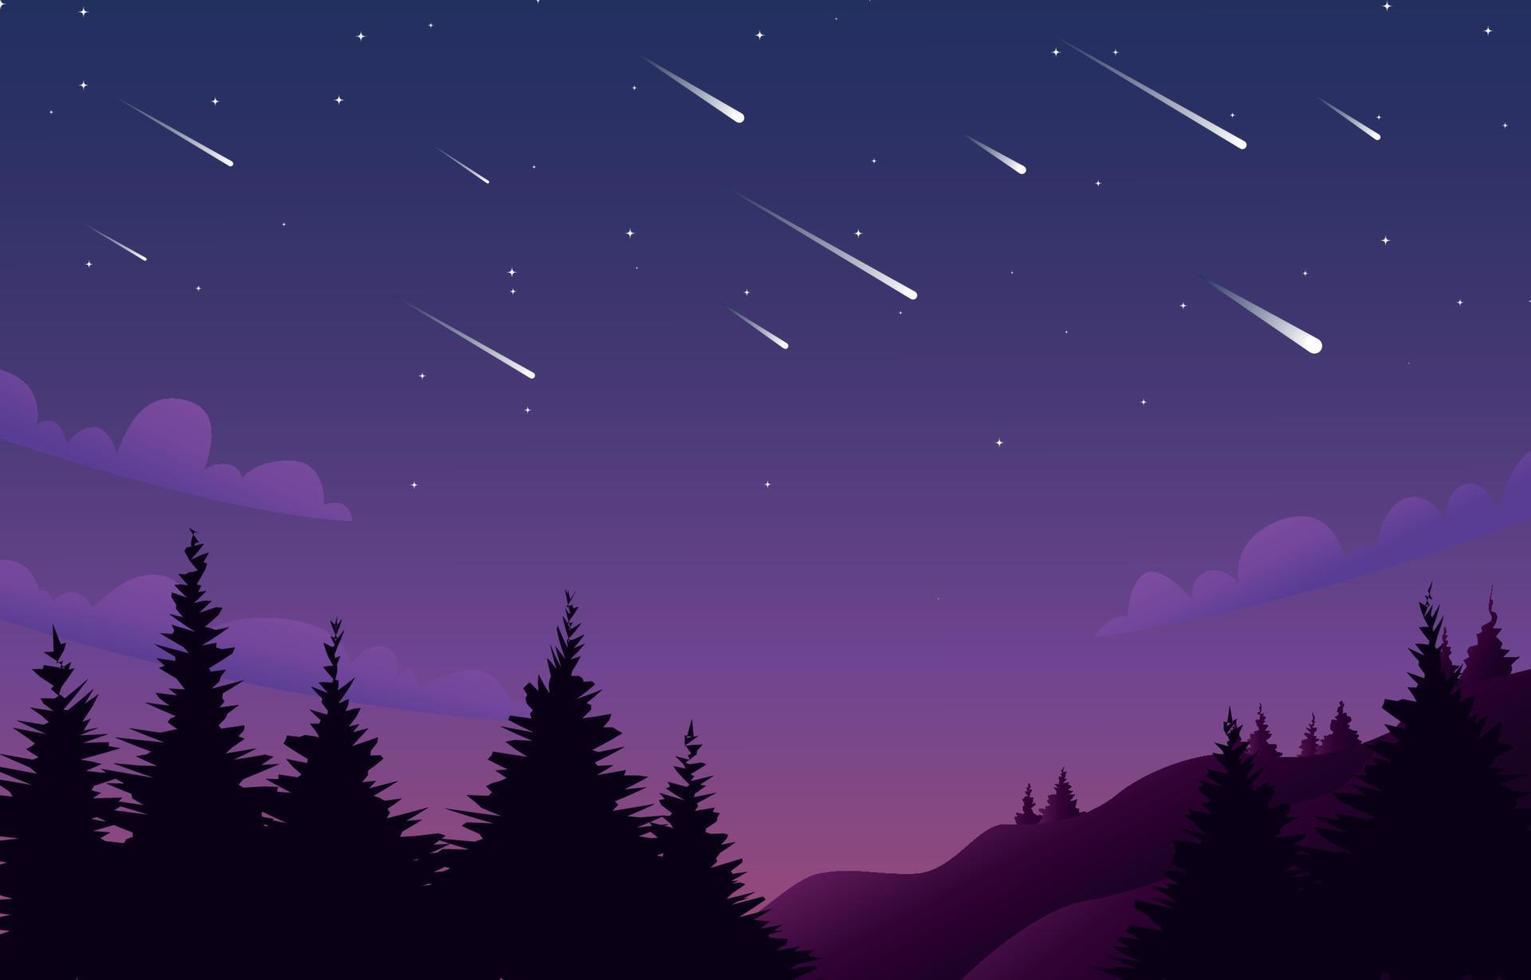 Meteor Shower at Night Background vector